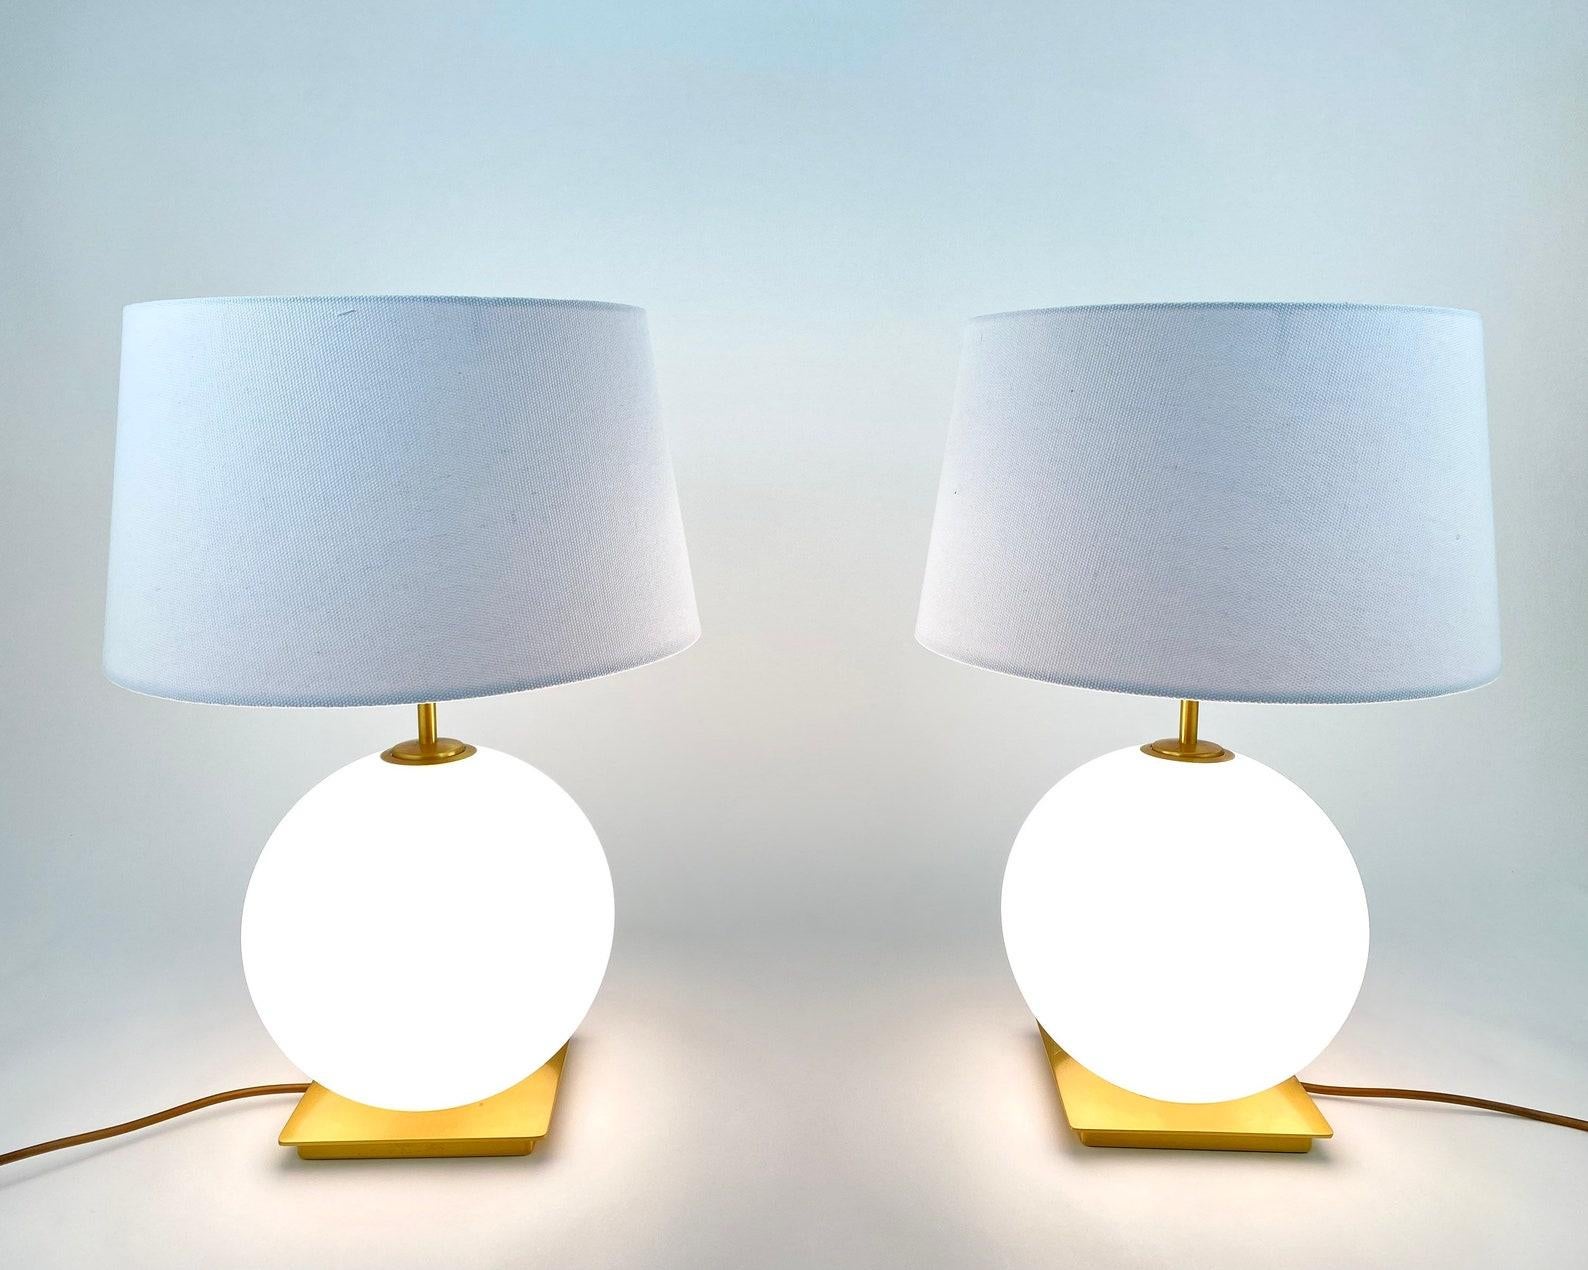 German Vintage Pair of Table Lamps in Brass and Opaline Glass by Holtkötter, 2000 For Sale